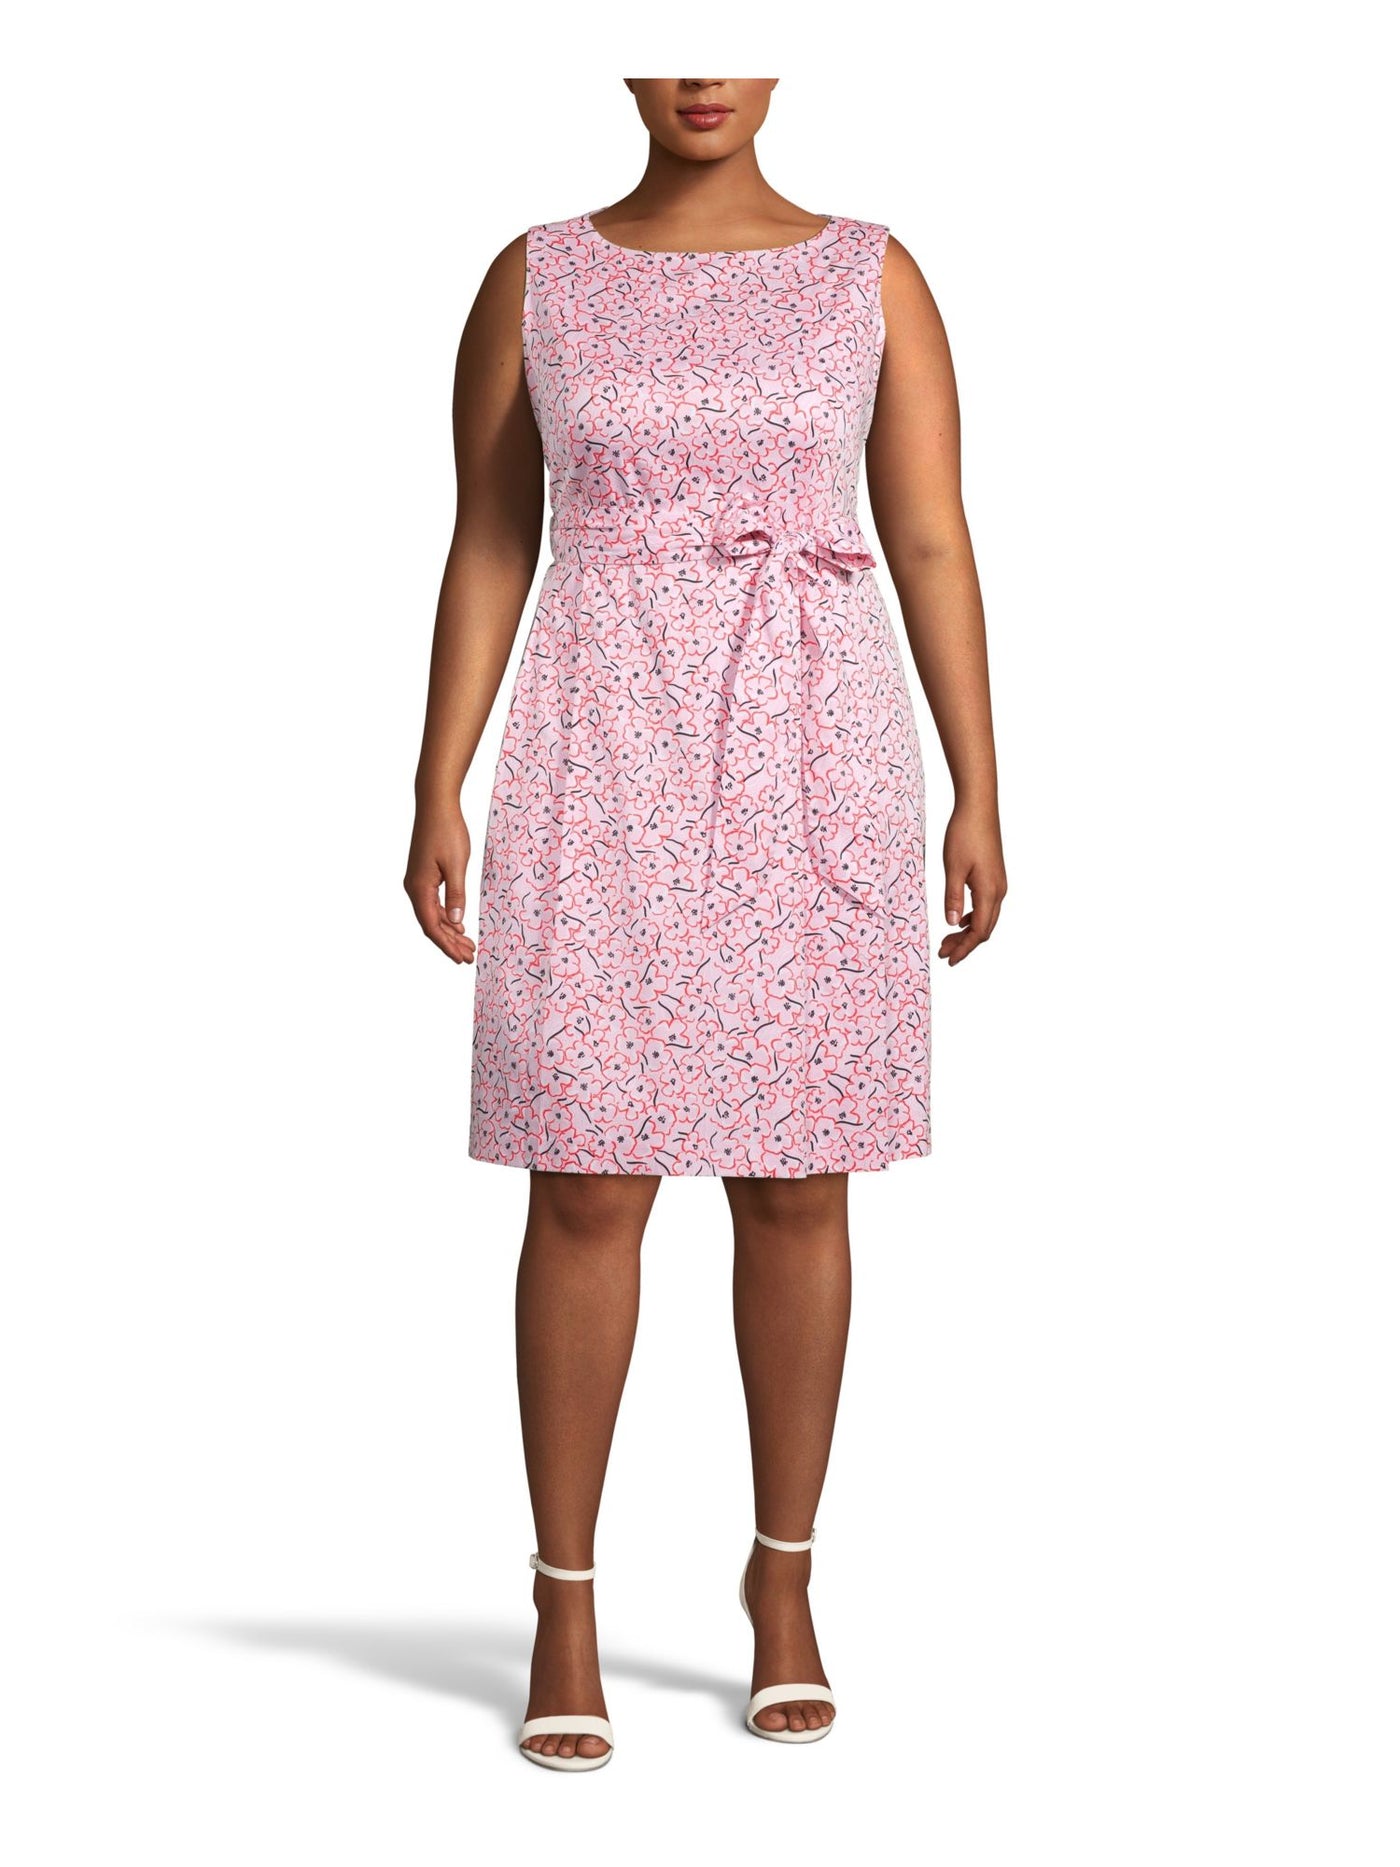 ANNE KLEIN Womens Pink Zippered Tie Floral Sleeveless Boat Neck Above The Knee Fit + Flare Dress Plus 24W